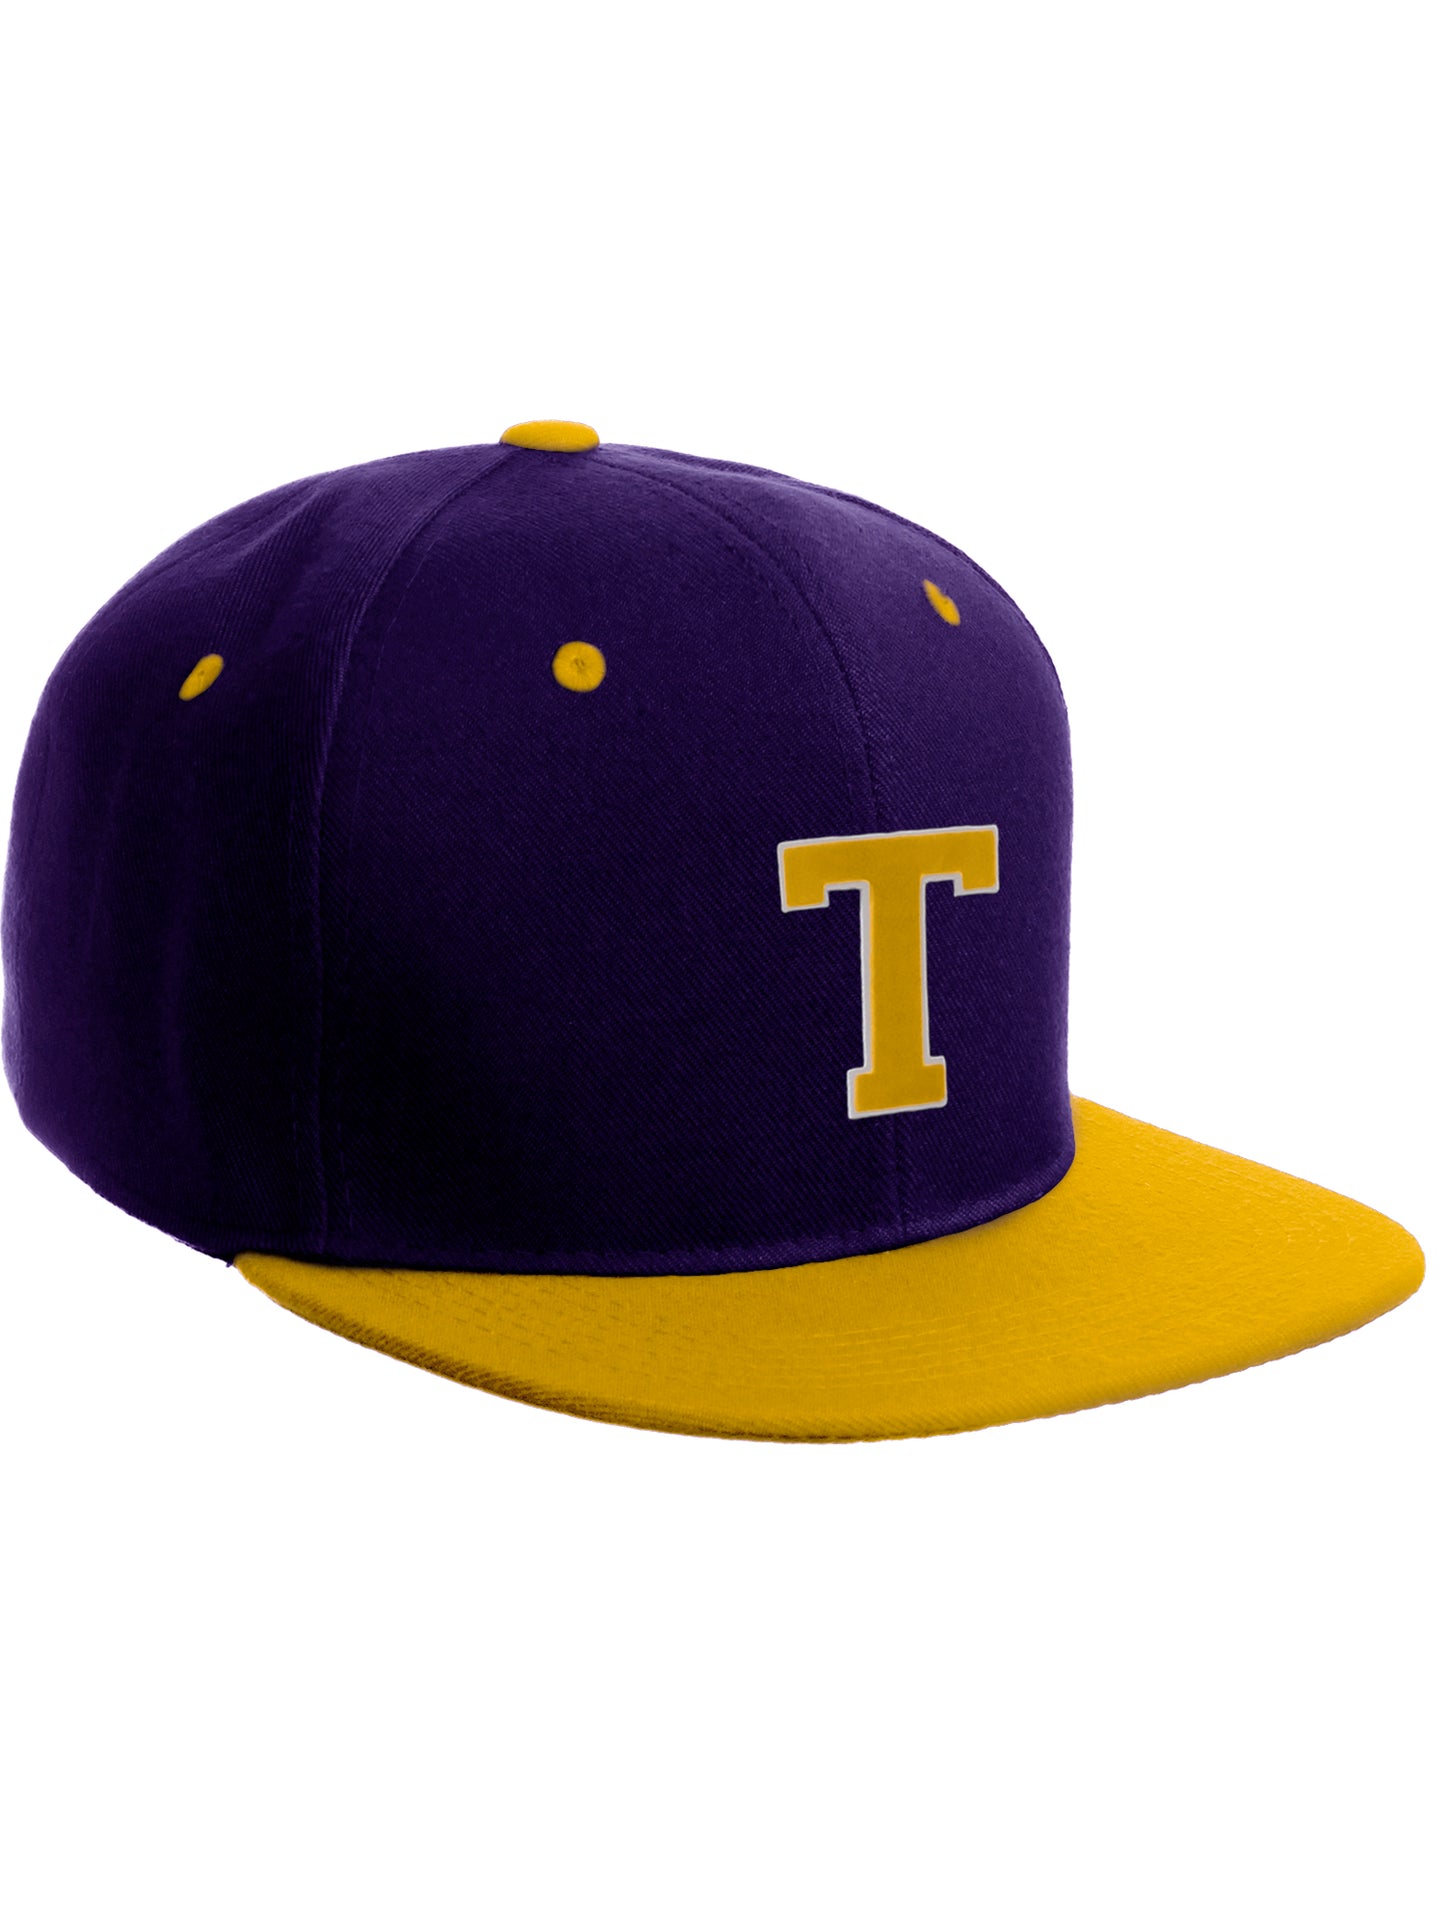 Classic Snapback Hat Custom A to Z Initial Letters, Purple Gold Cap White Gold